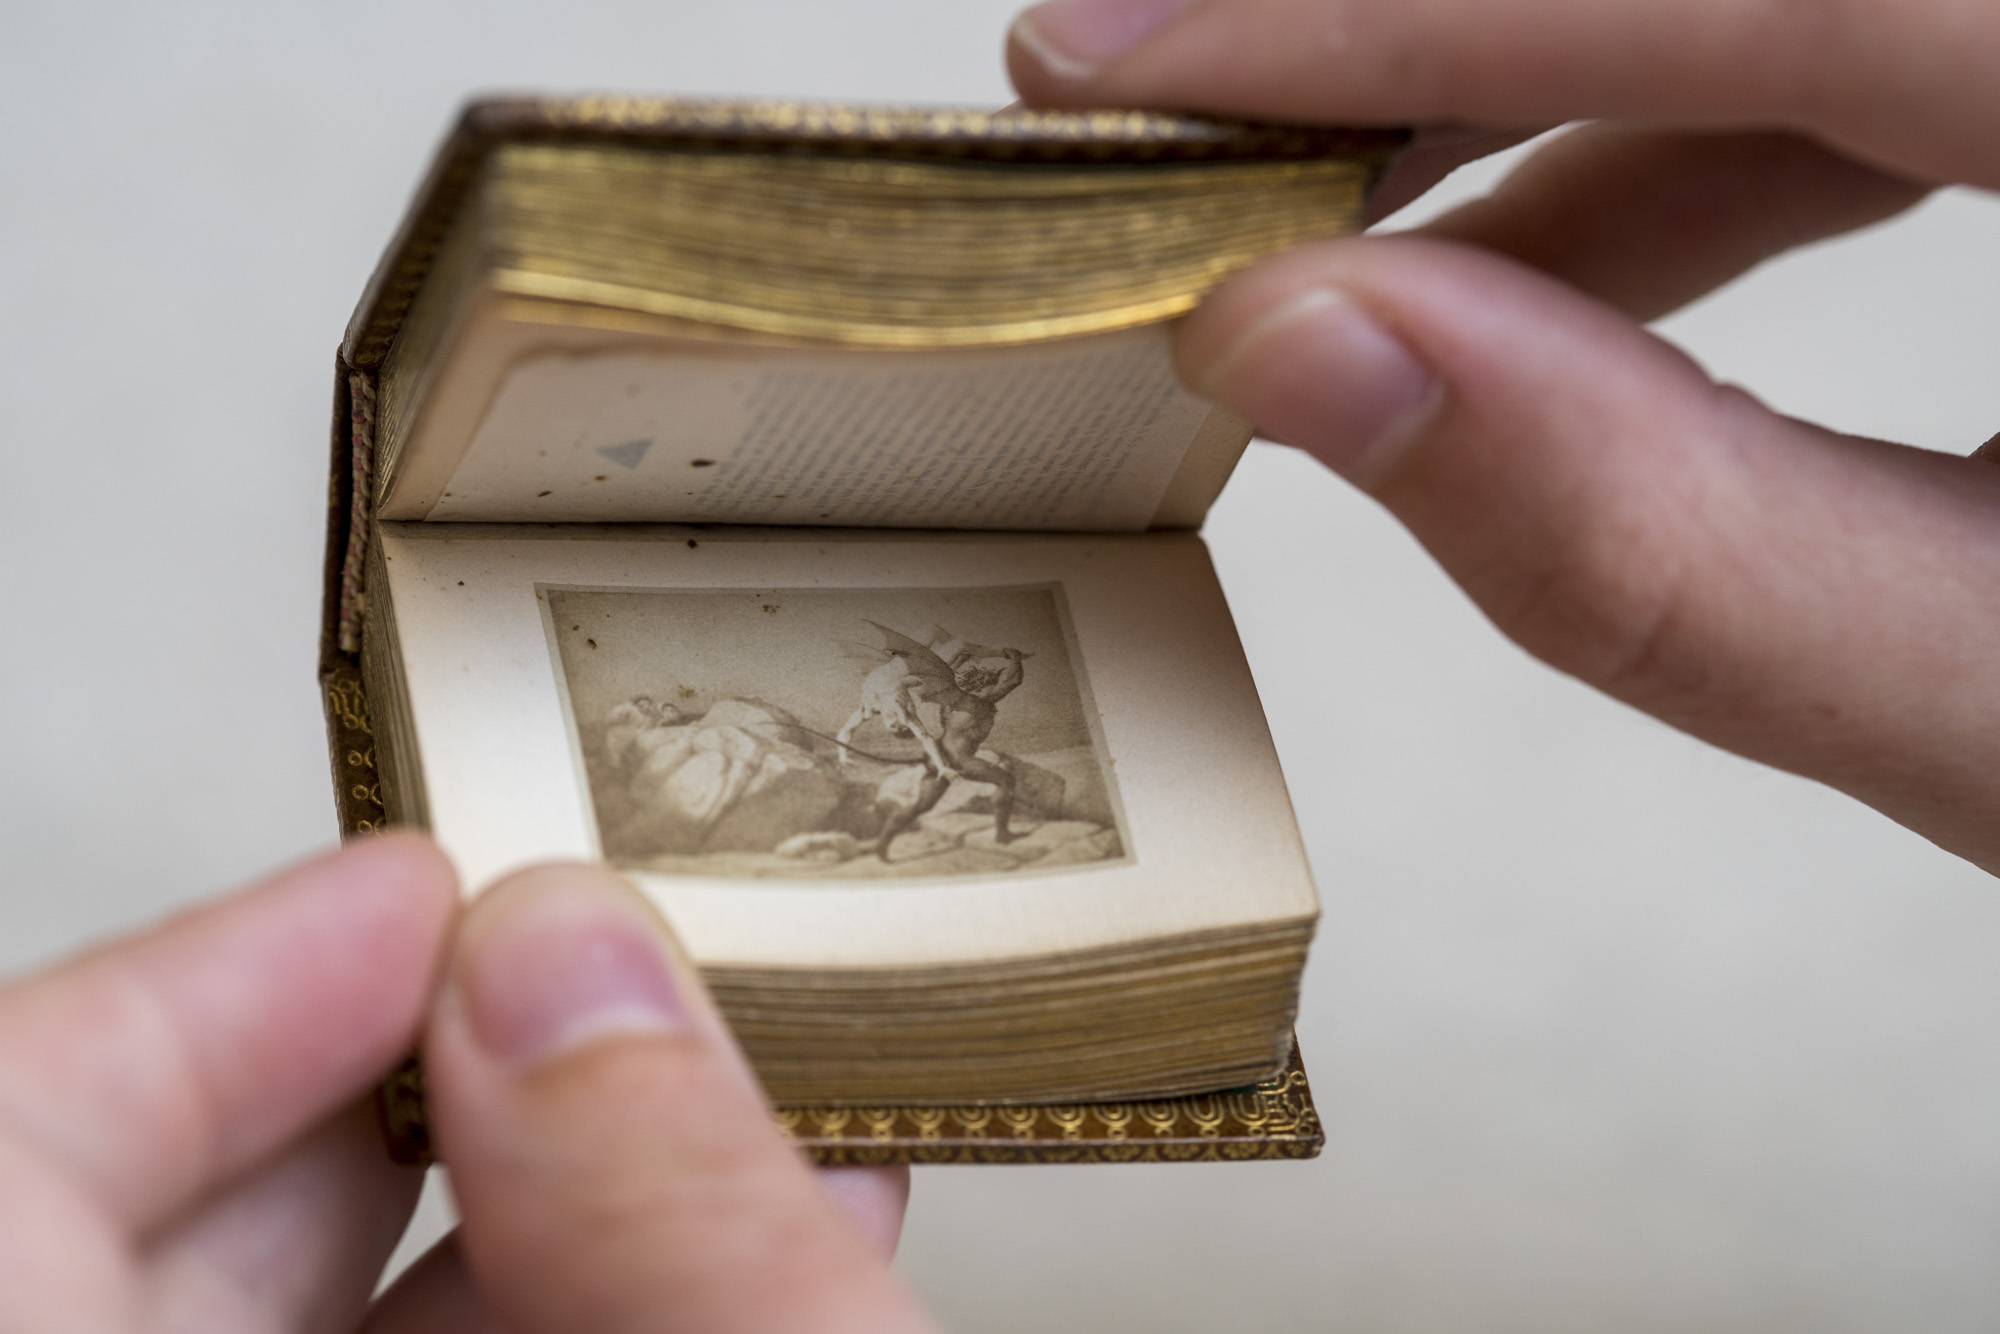 person flipping through the pages of an old mini book